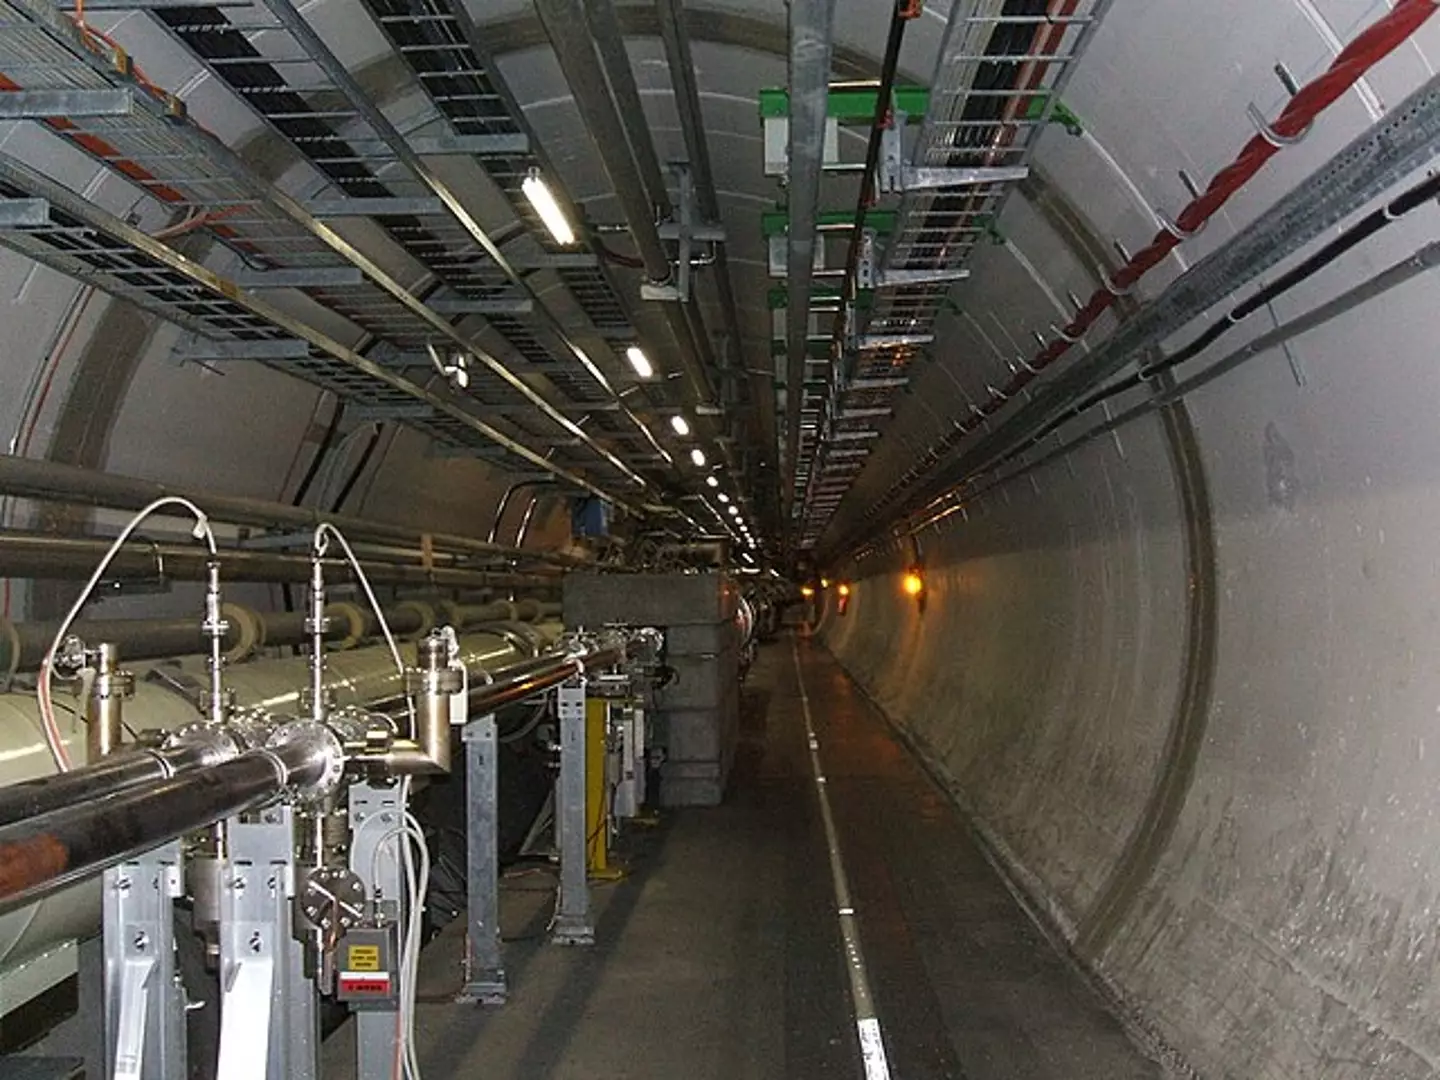 The LHC first started up in 2008.